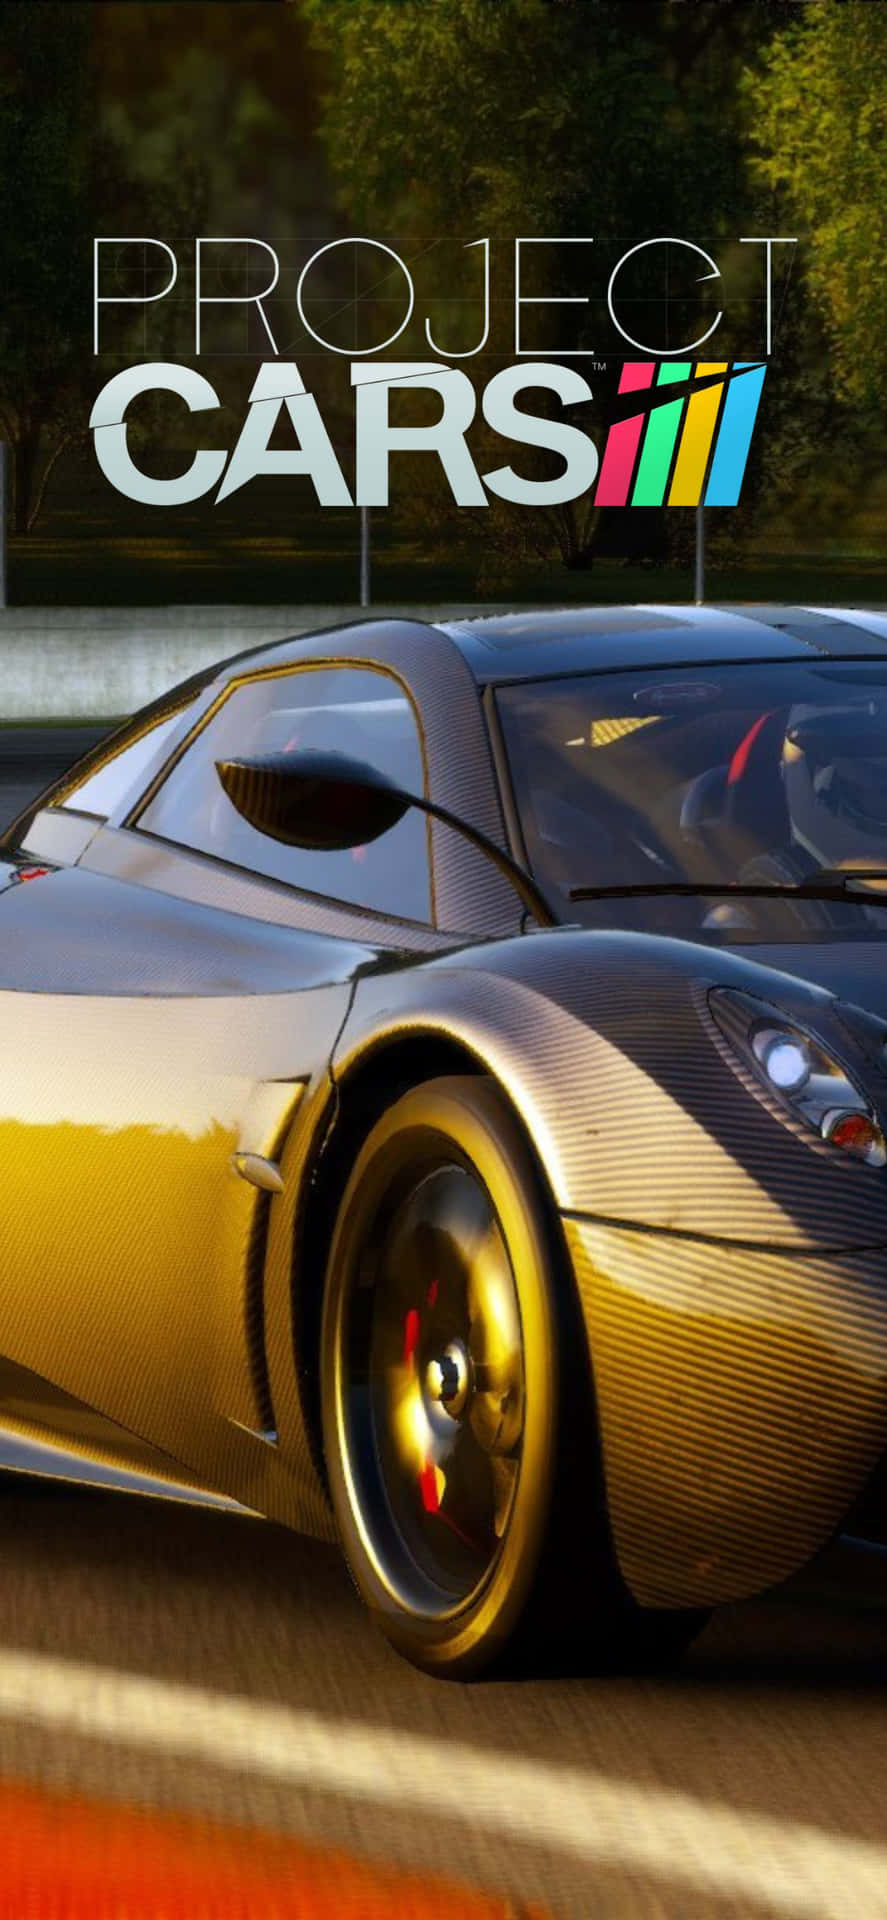 At the Races: Dominate the track with Project Cars and the new Iphone Xs.